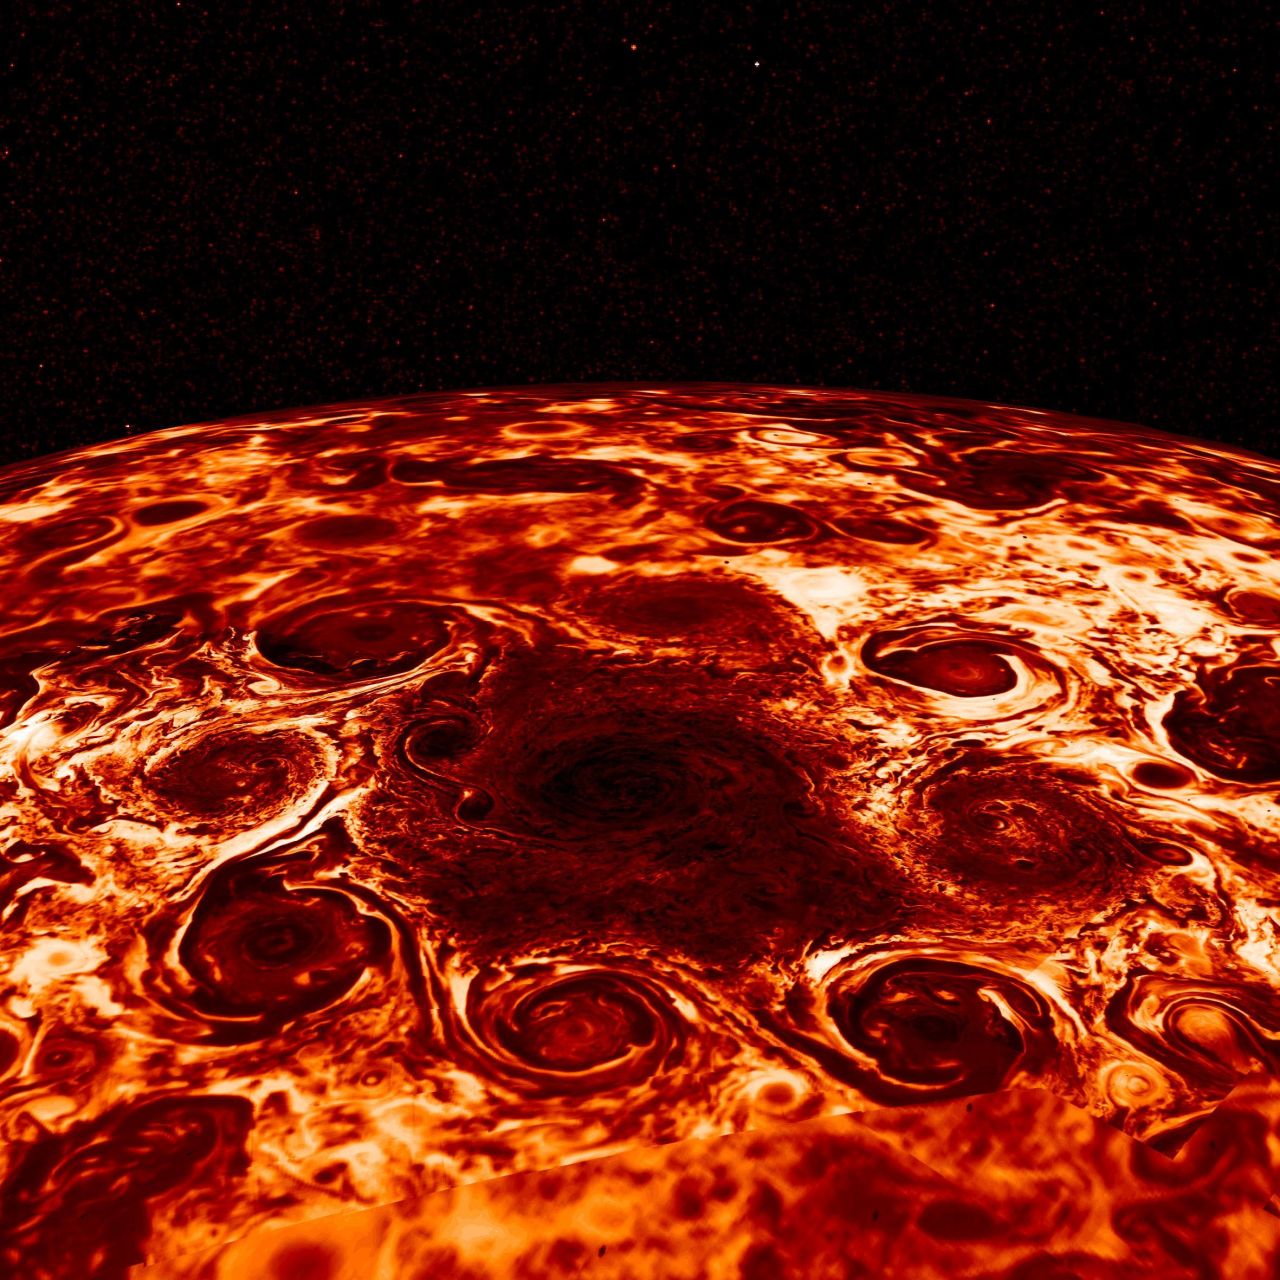 This composite image, derived from data collected by the Jovian Infrared Auroral Mapper (JIRAM) instrument aboard NASA's Juno mission to Jupiter, shows the central cyclone at the planet's north pole and the eight cyclones that encircle it.